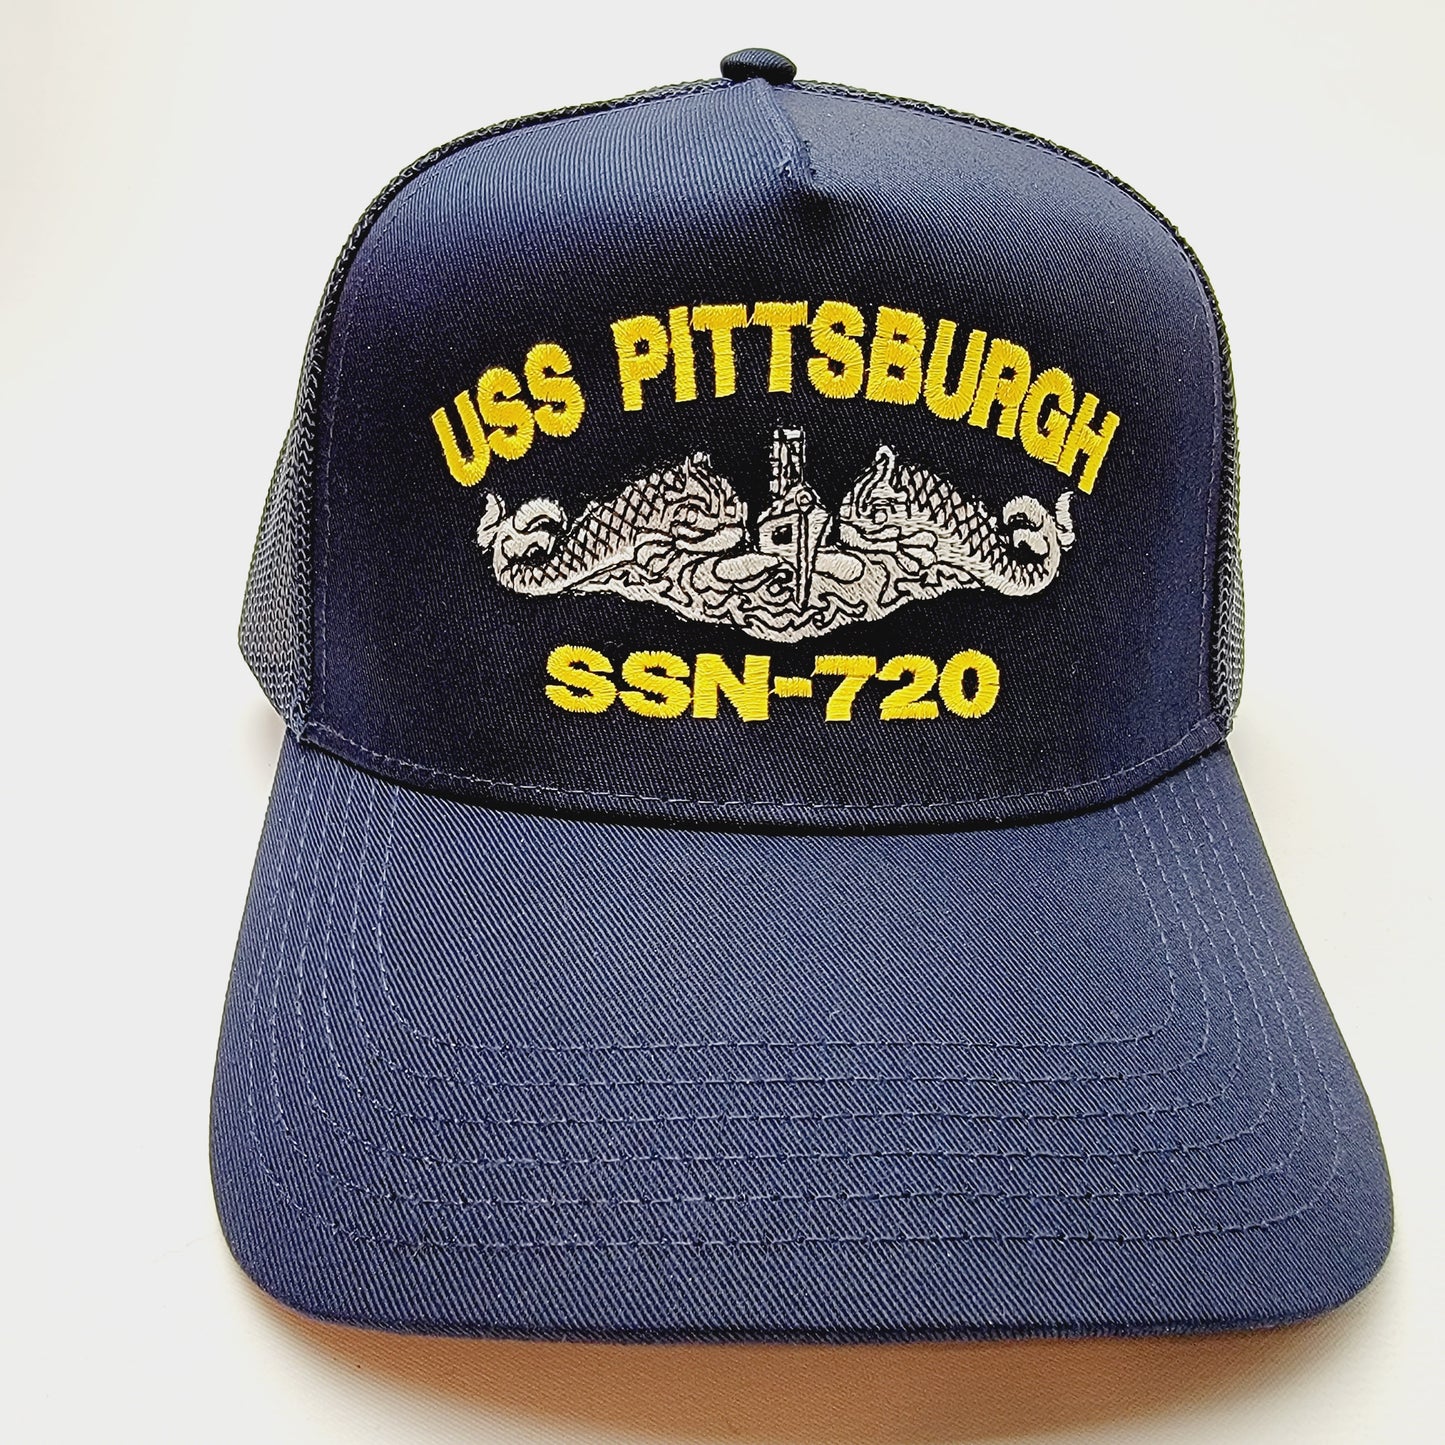 US NAVY USS PITTSBURGH SSN-720 Embroidered Hat Baseball Cap Adjustable Blue